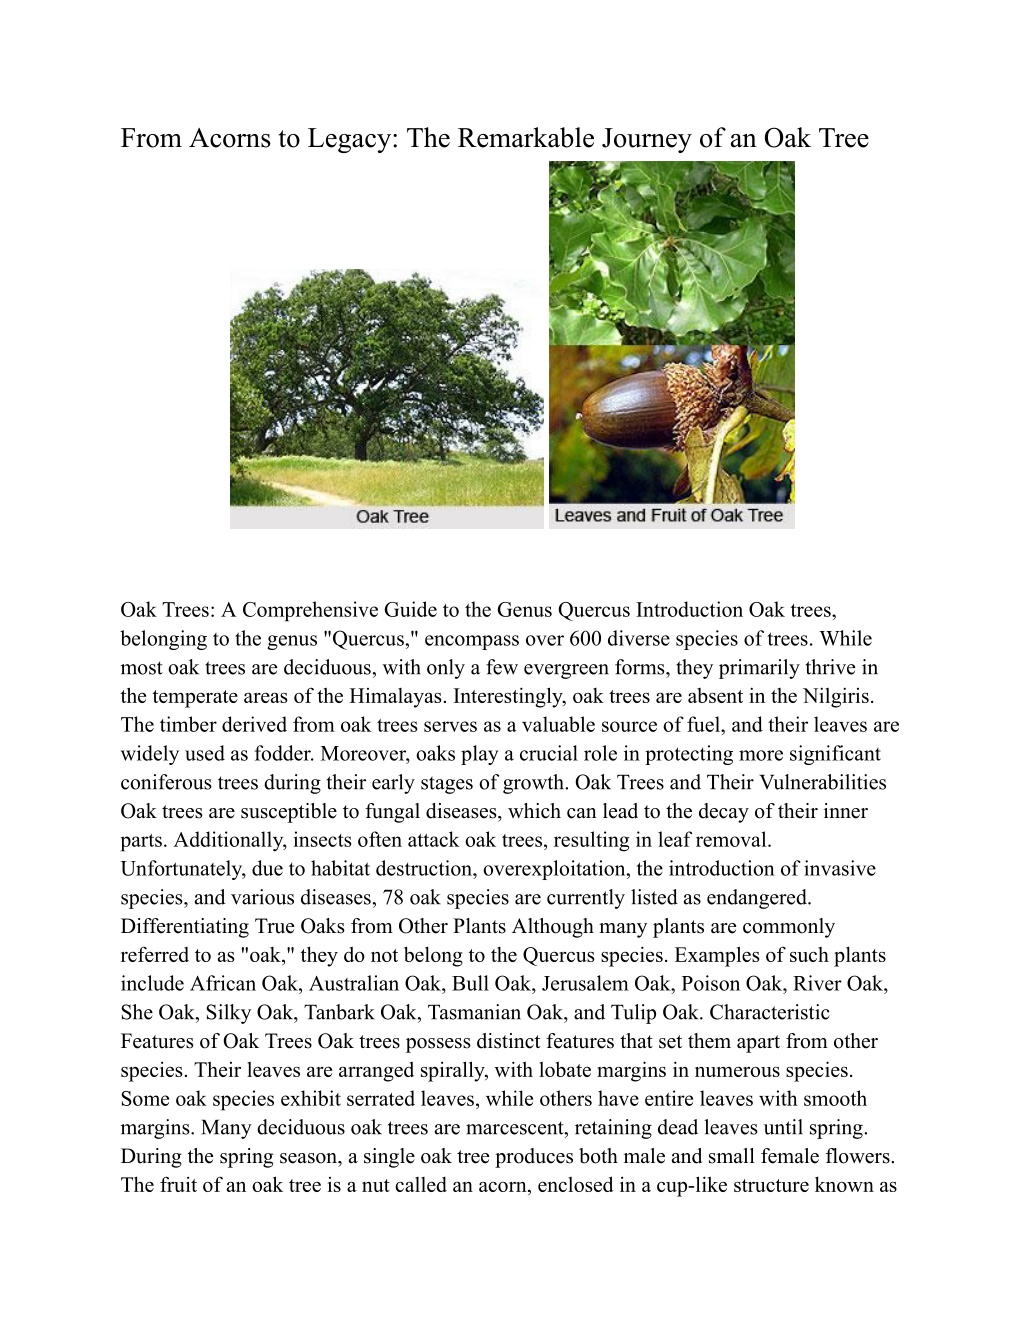 PPT - From Acorns to Legacy_ The Remarkable Journey of an Oak Tree  PowerPoint Presentation - ID:12183841